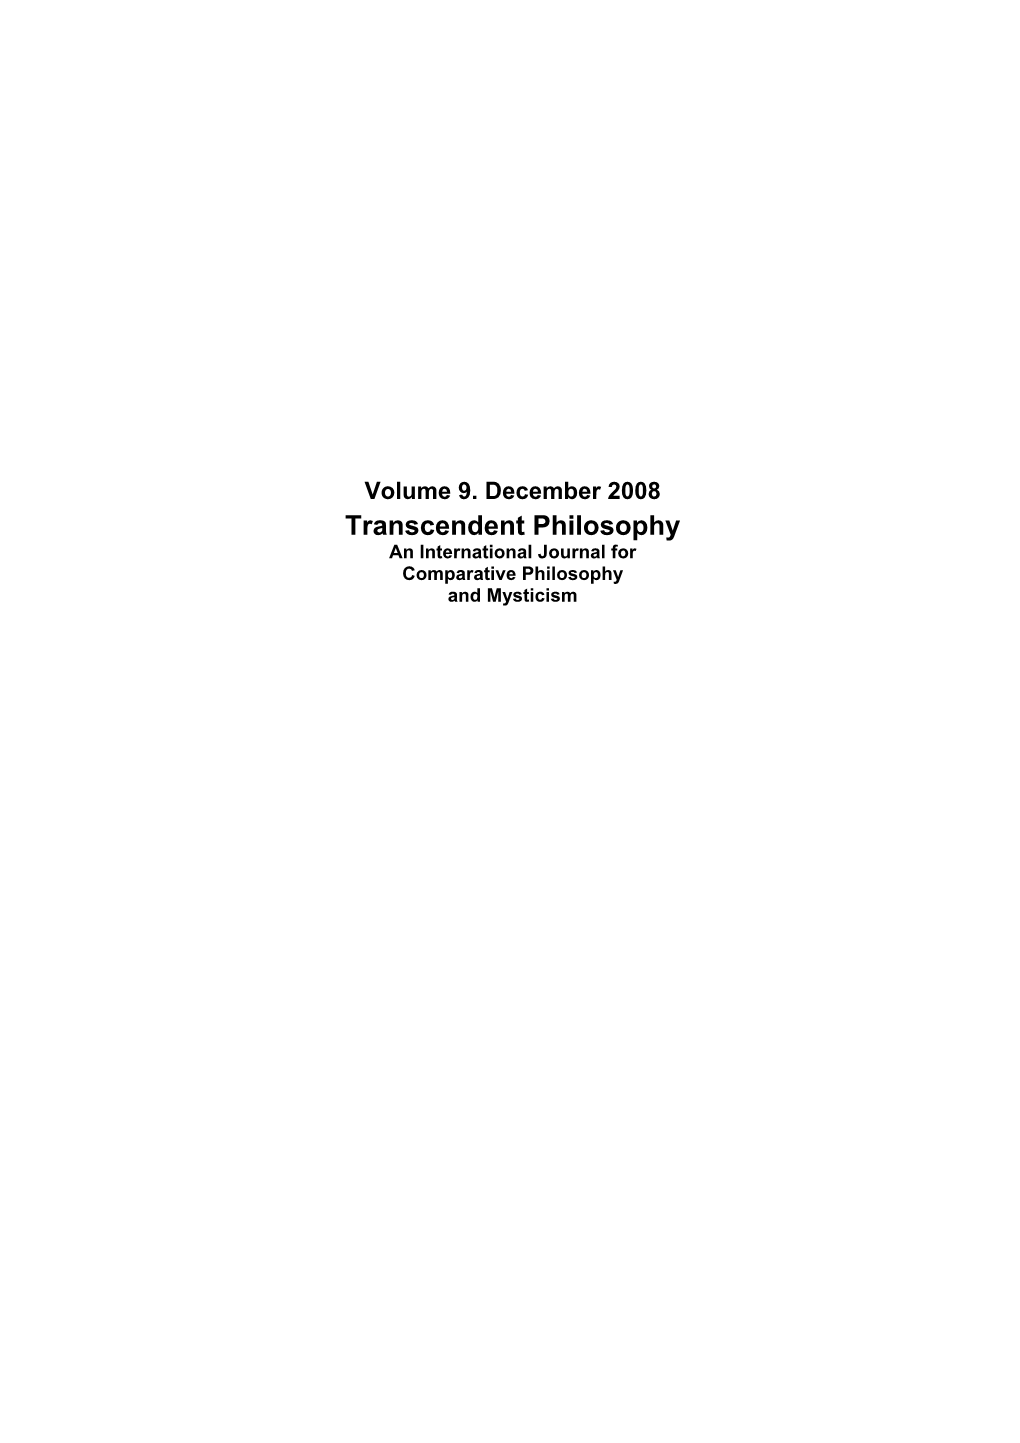 Transcendent Philosophy an International Journal for Comparative Philosophy and Mysticism Editor Transcendent Philosophy Is a Publication of the Seyed G